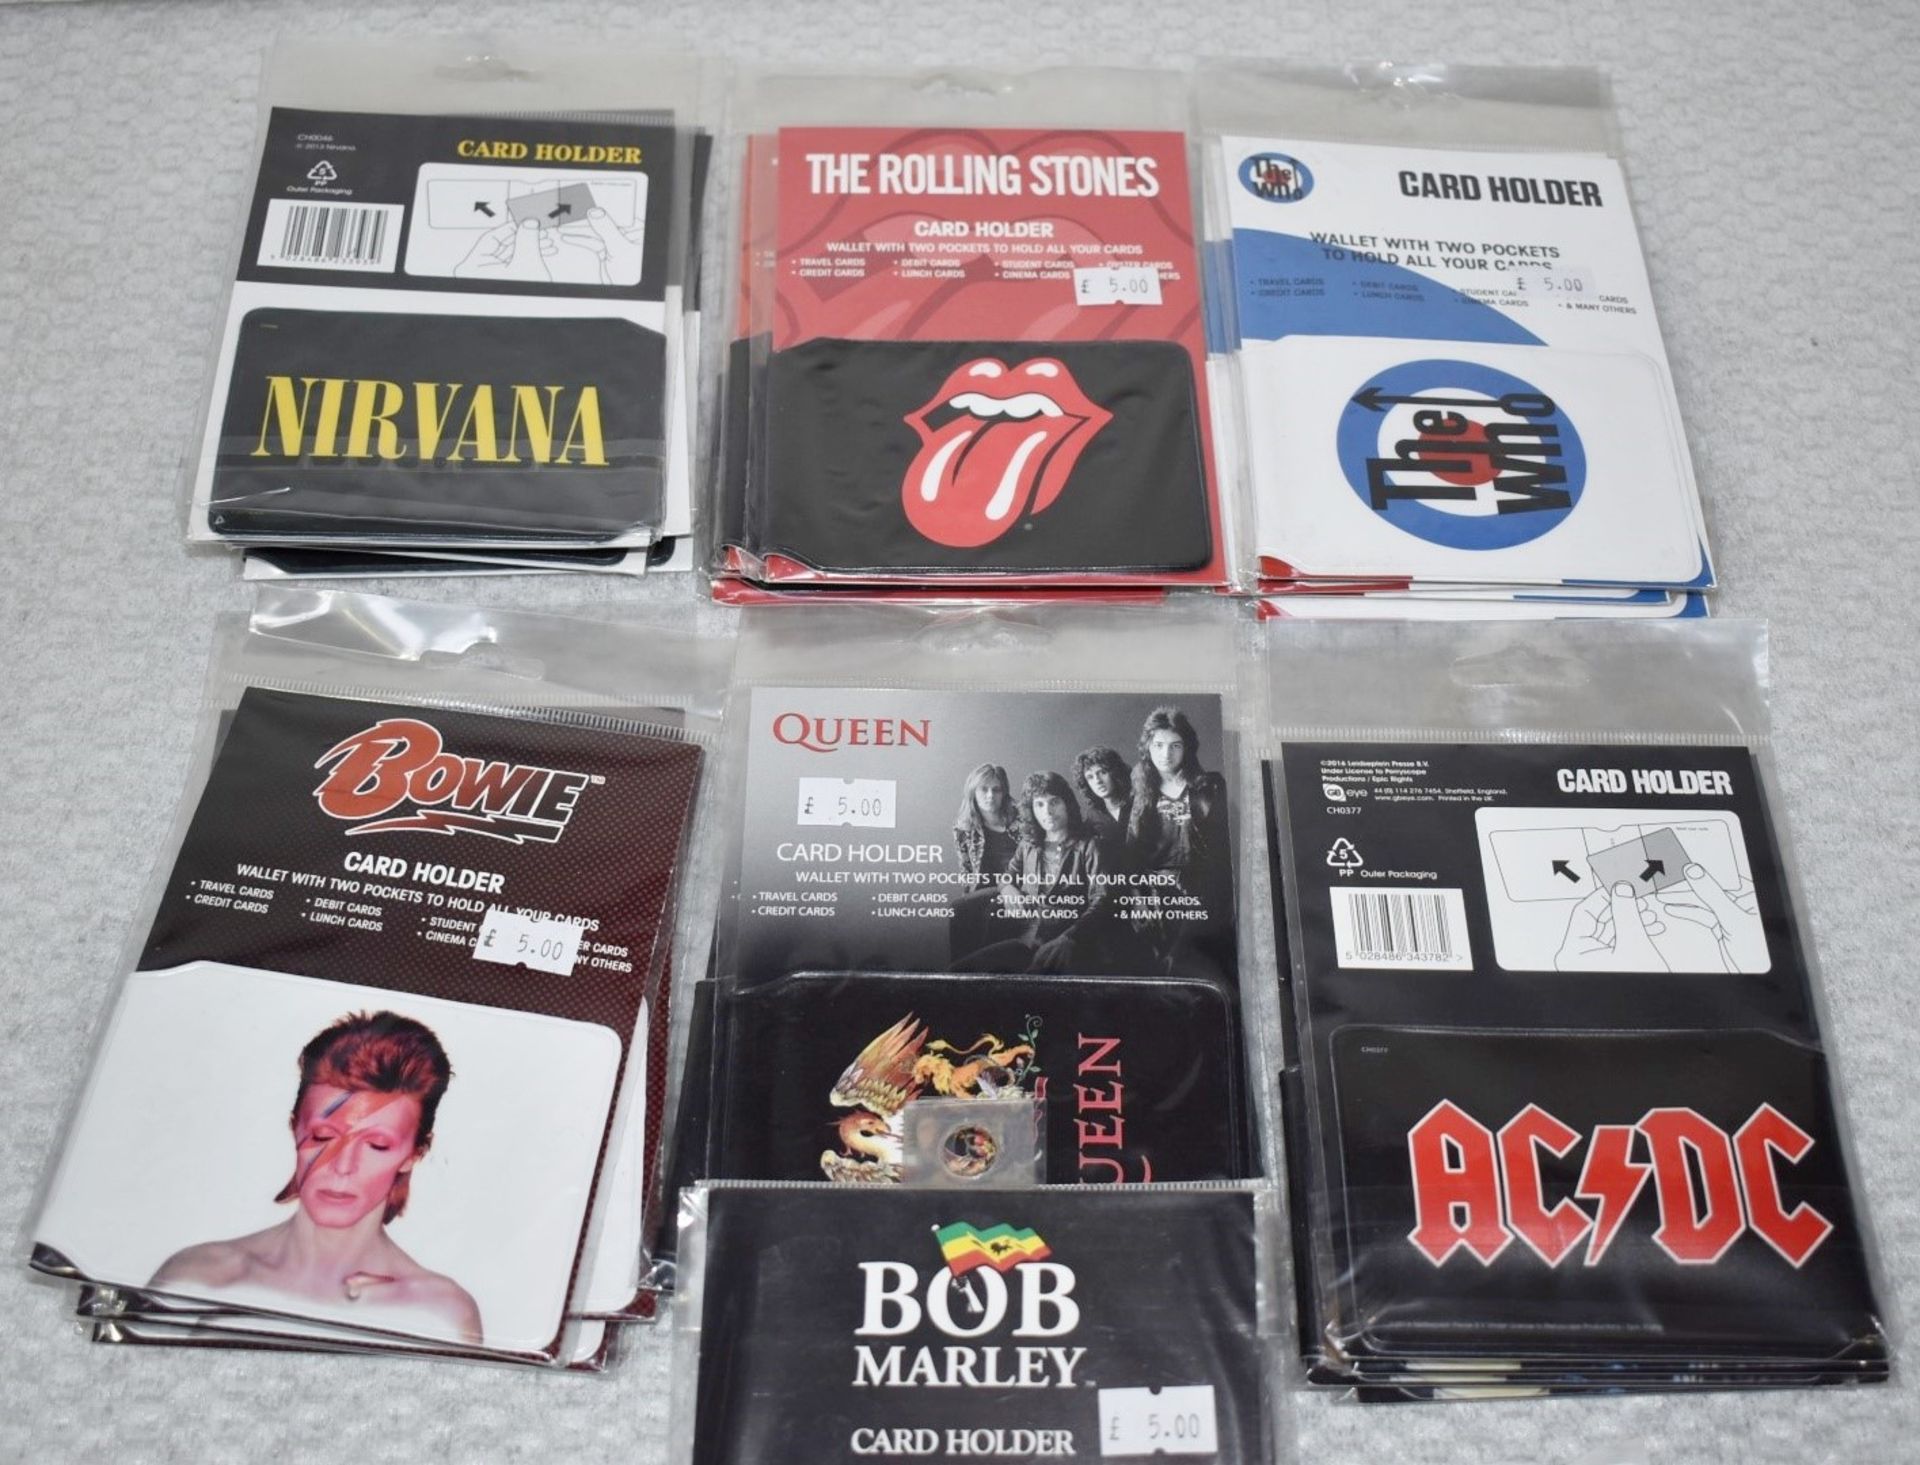 28 x Card Holder Wallets - Bowie, Nirvana, Rolling Stones, ACDC, Bob Marley, Queen - RRP £140